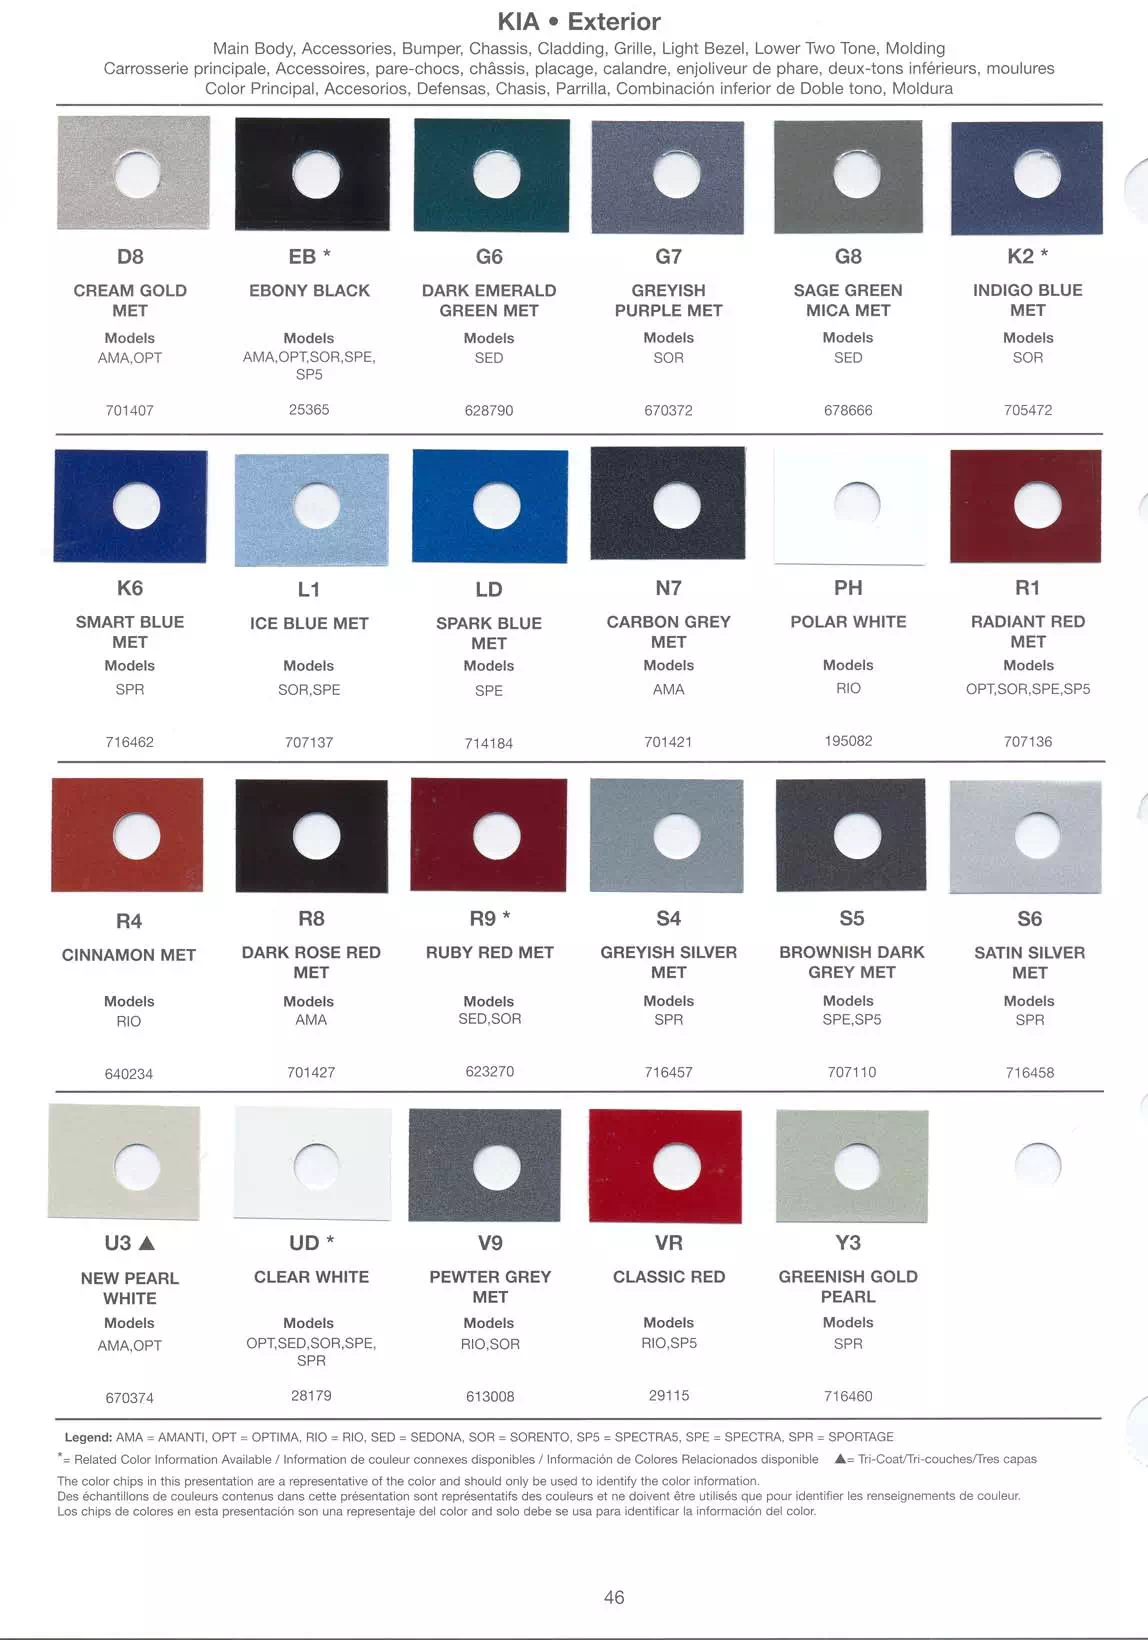 Exterior Paint Colors for Kia Vehicles in 2005